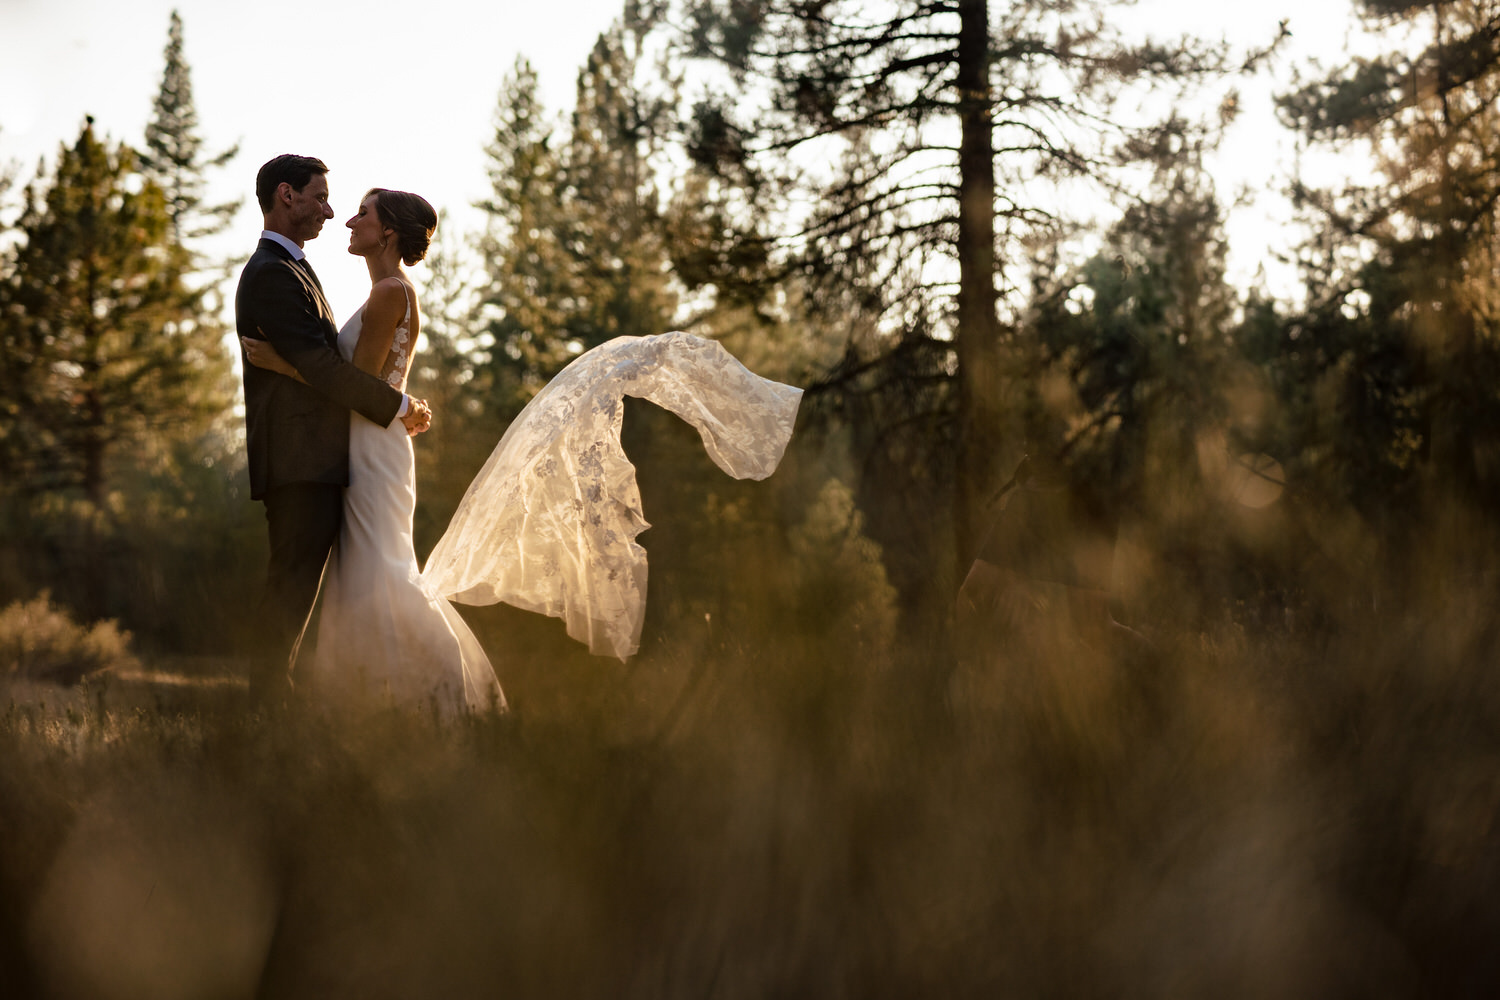 Gorgeous sunset photo location for the bride and groom at Chalet View Lodge.